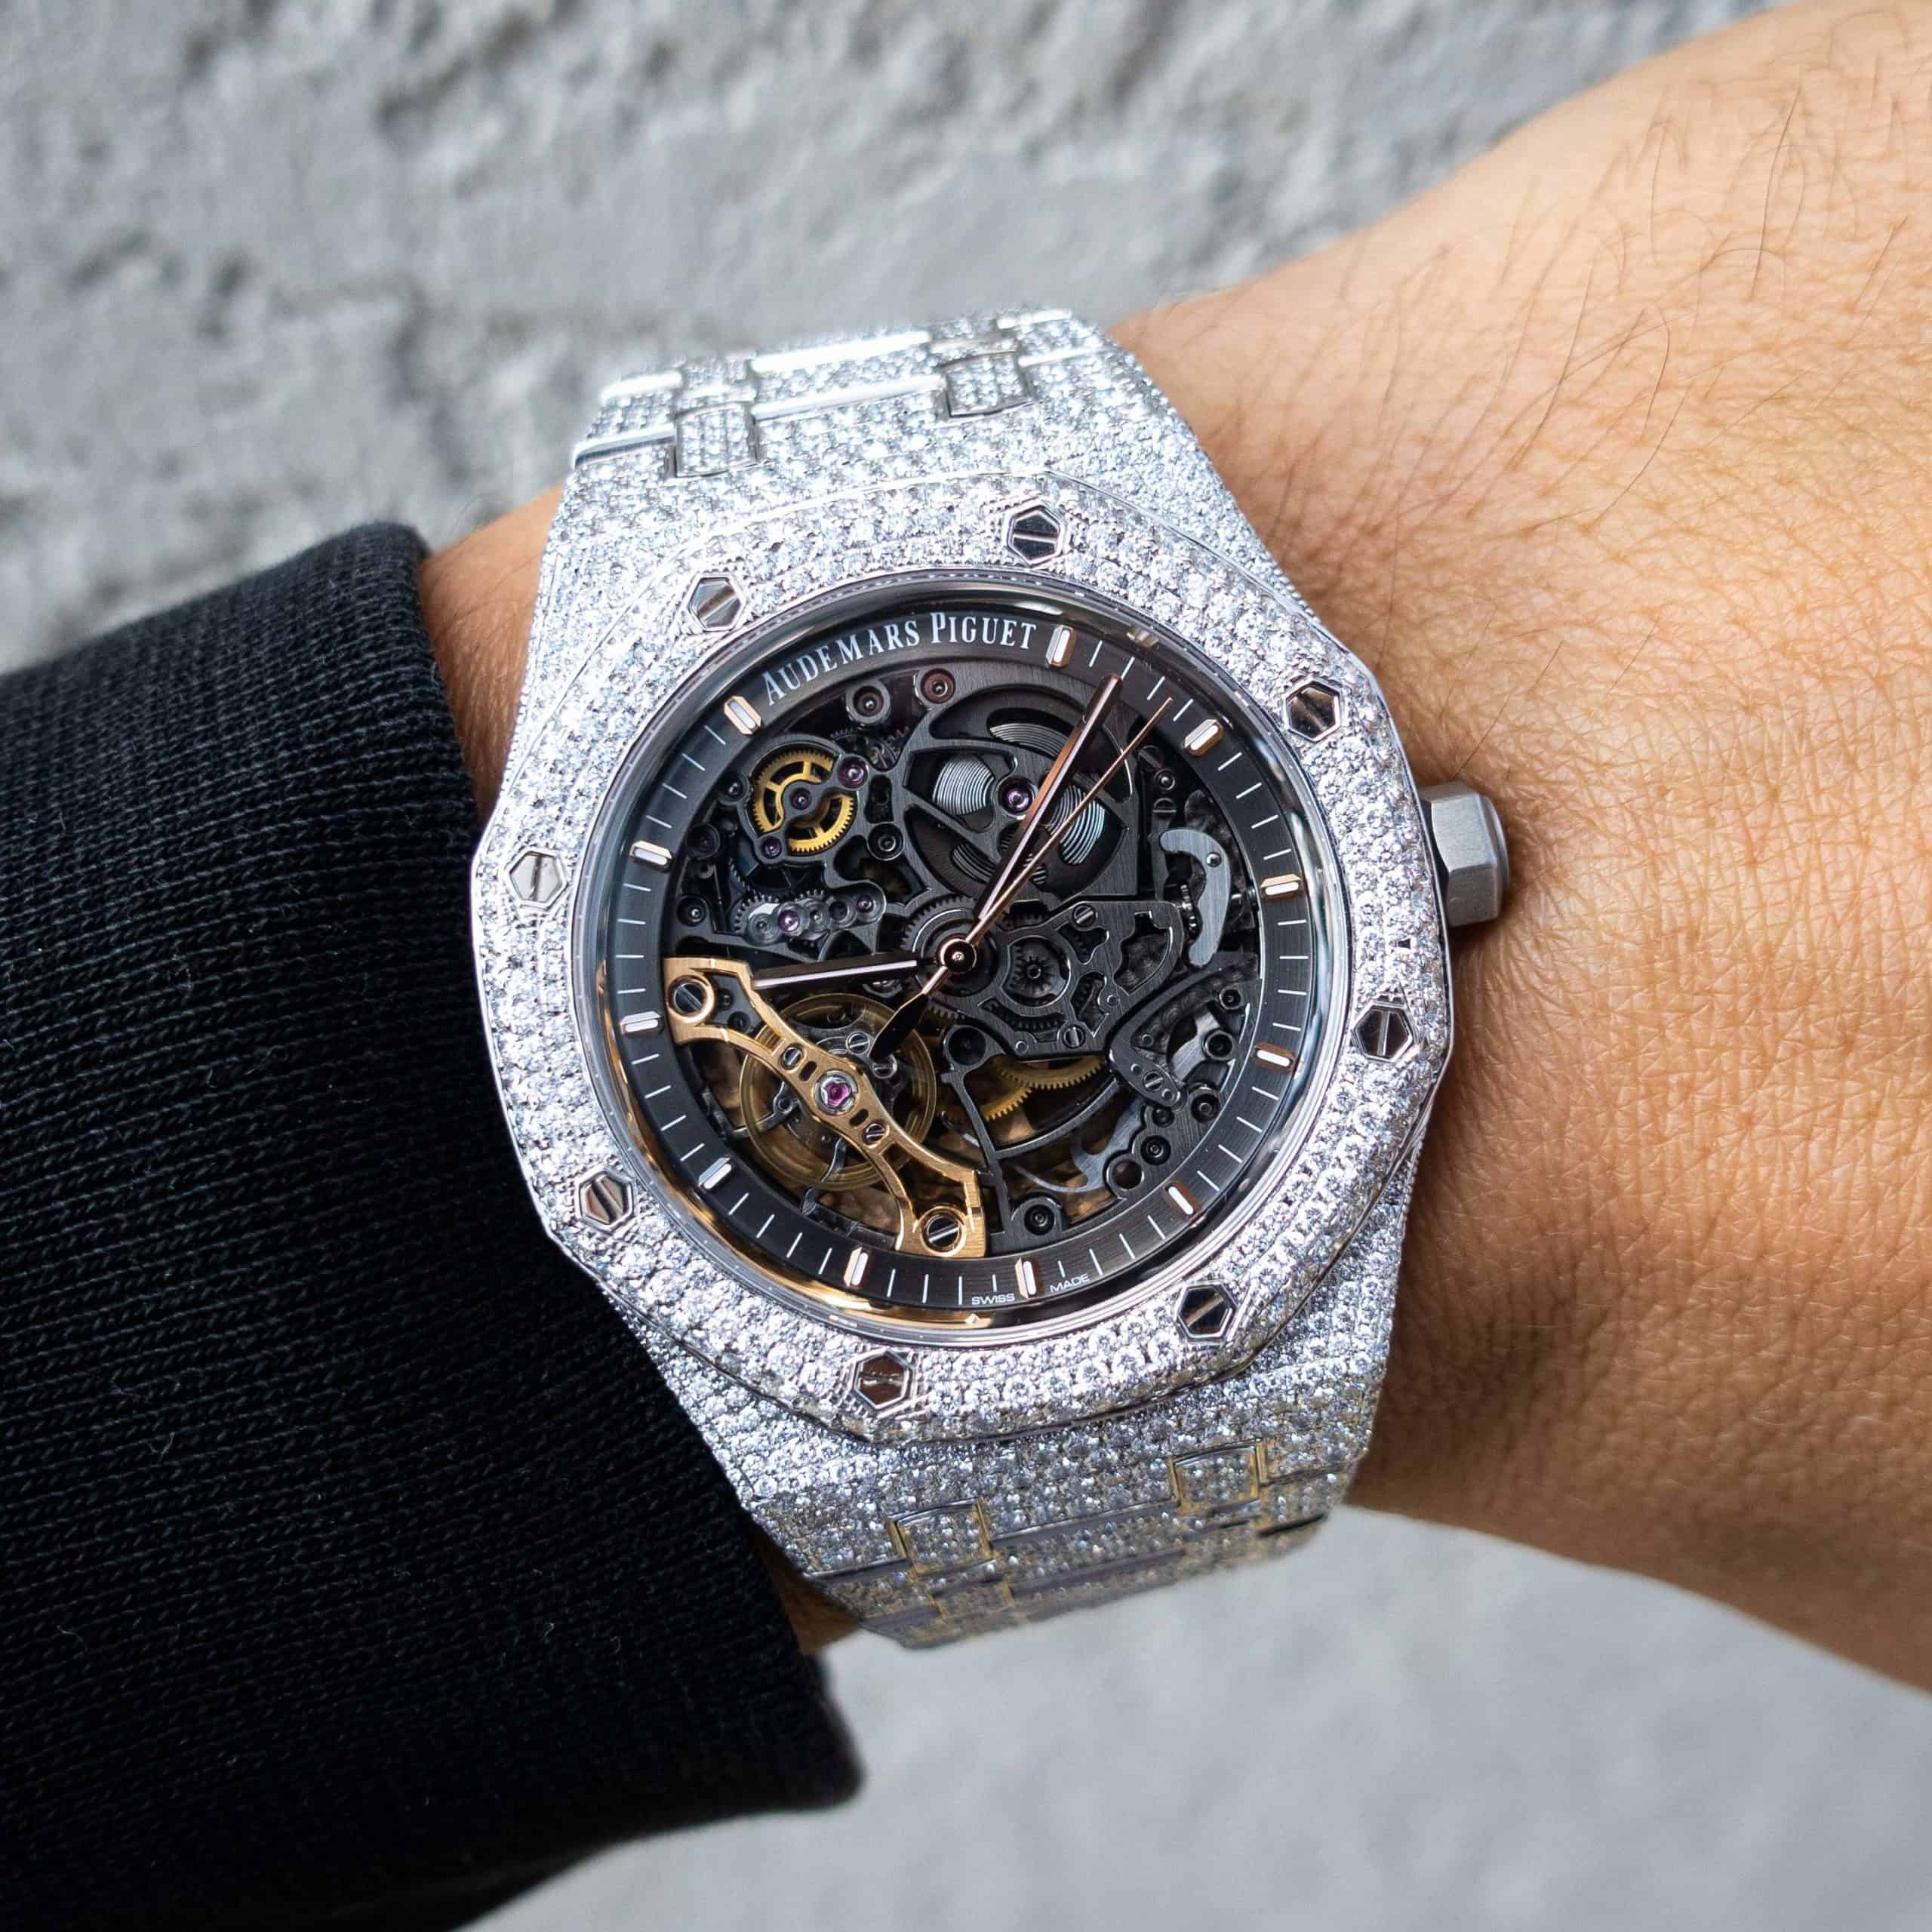 Round Audemars Piguet Skeleton Automatic Watch, For Personal Use